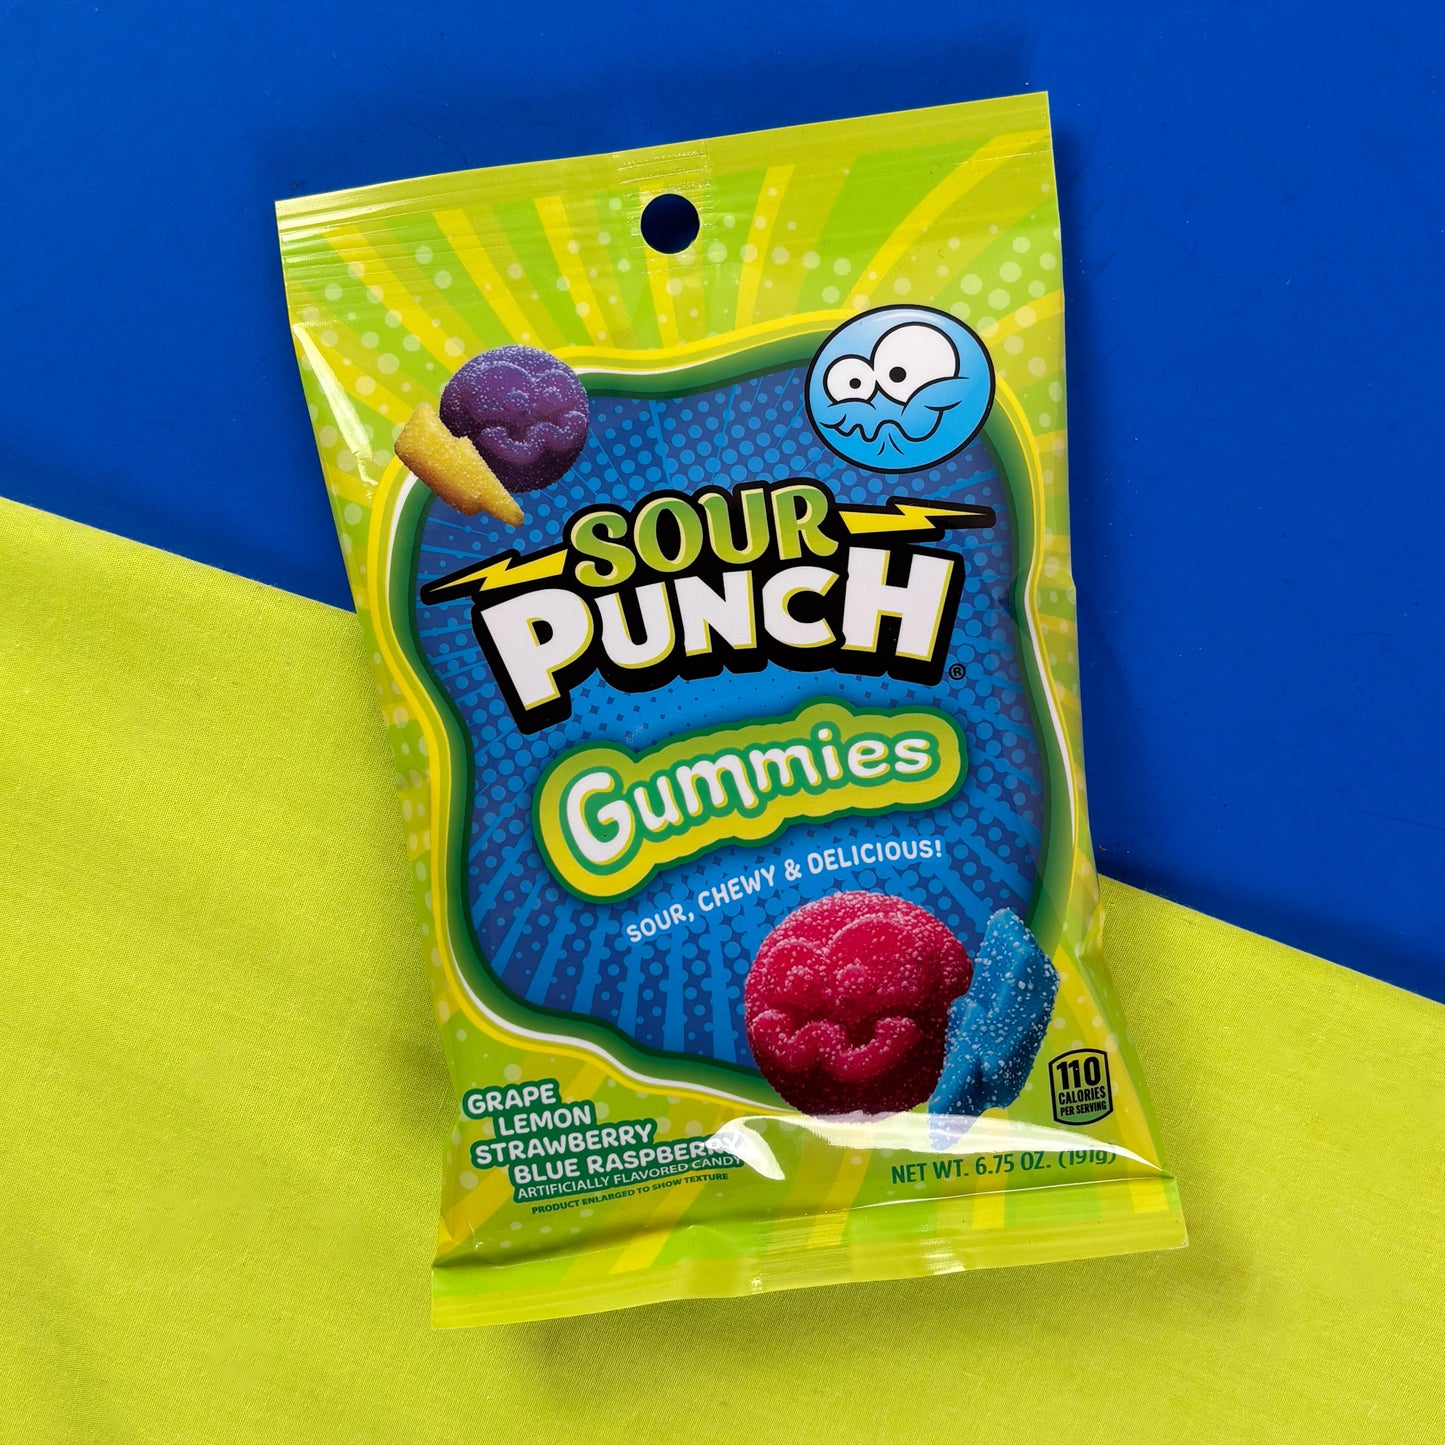 Sour Punch Gummies on a blue and yellow split background